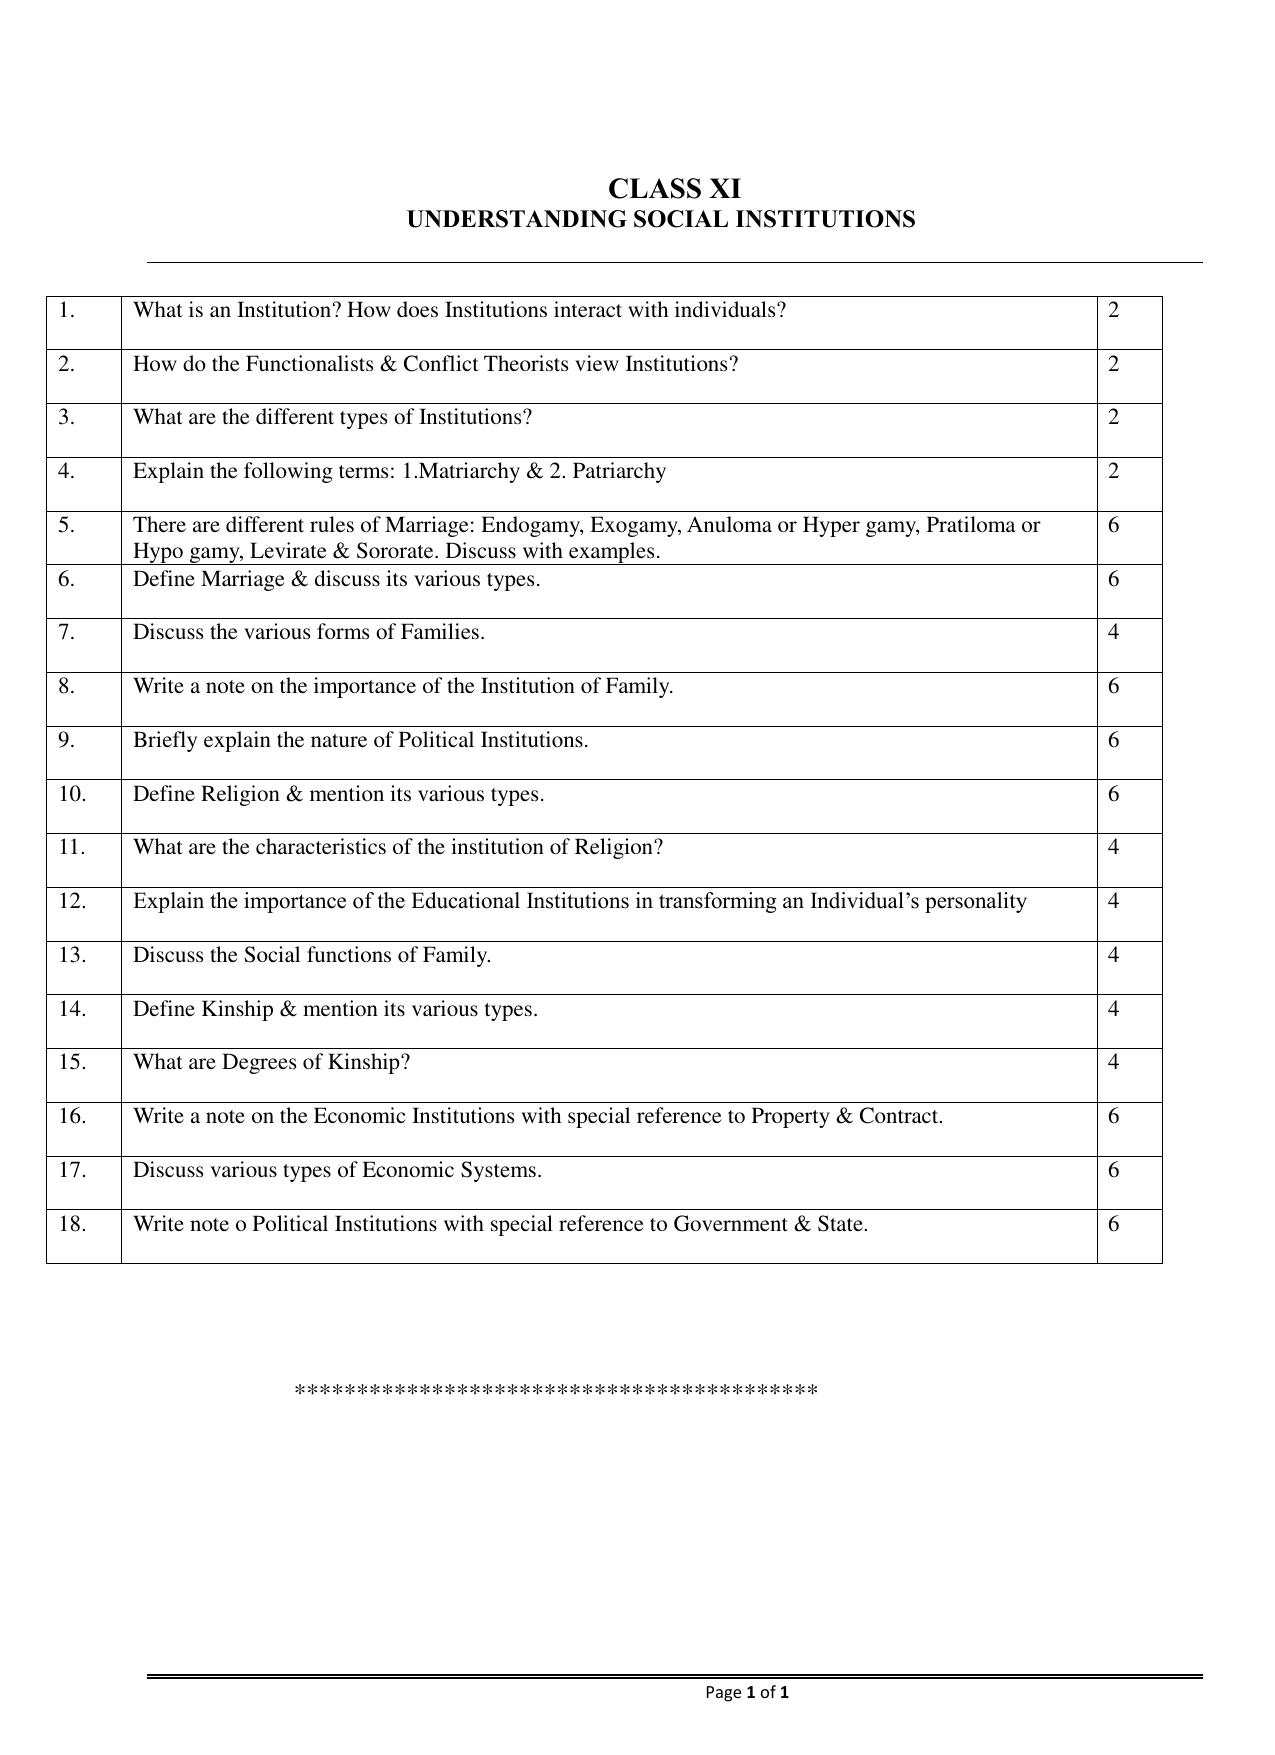 CBSE Worksheets for Class 11 Sociology Understanding Social Institutions Assignment - Page 1